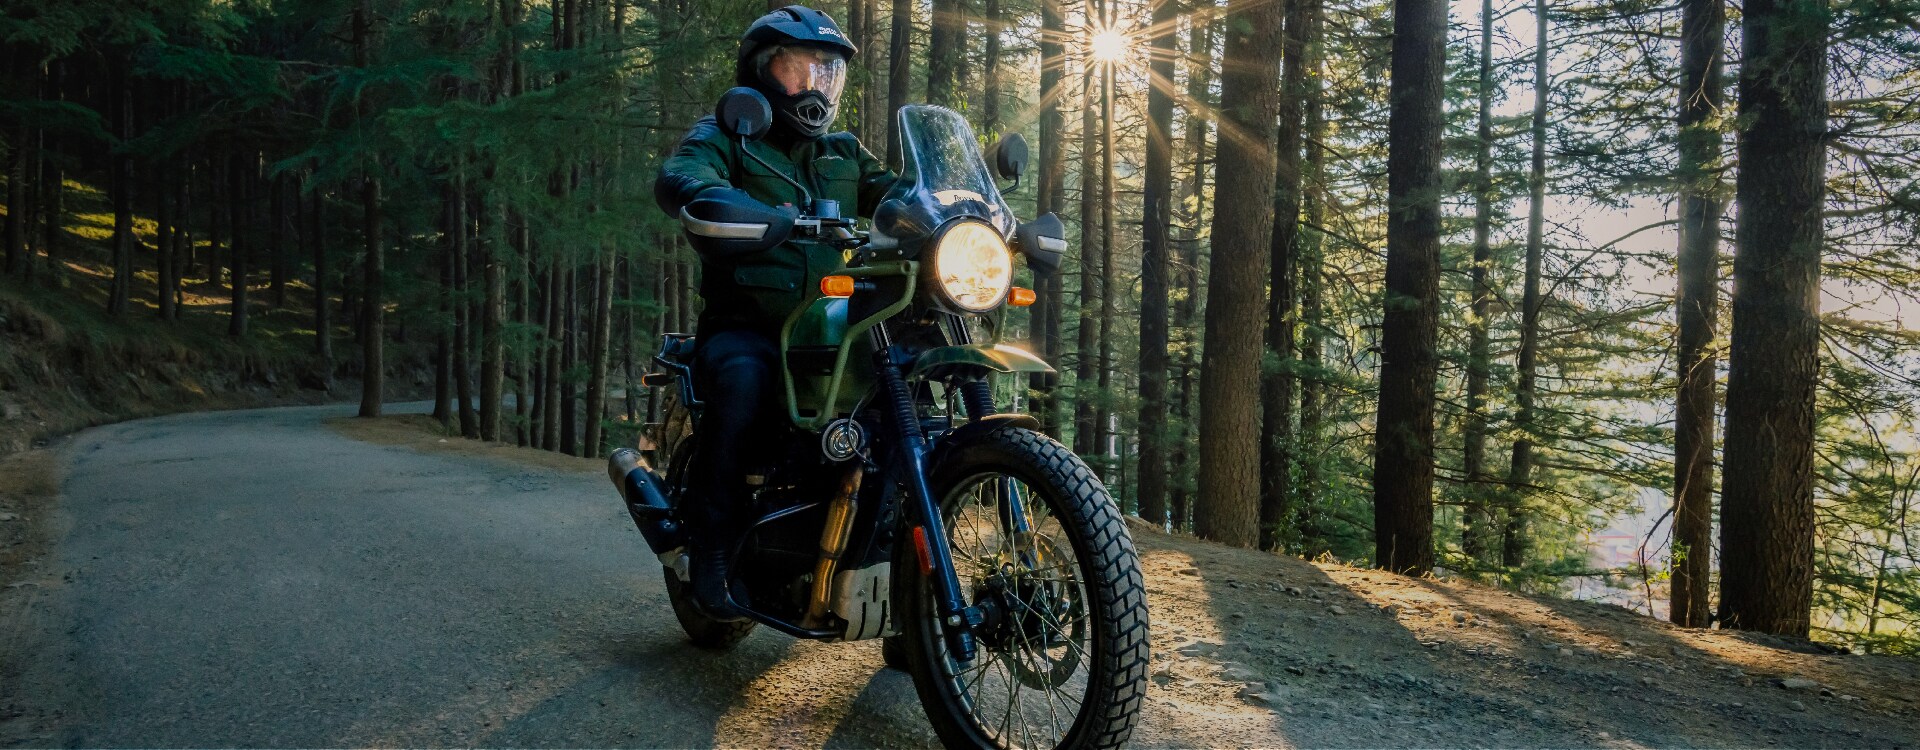 Himalayan 410 - For a Steadfast Ride